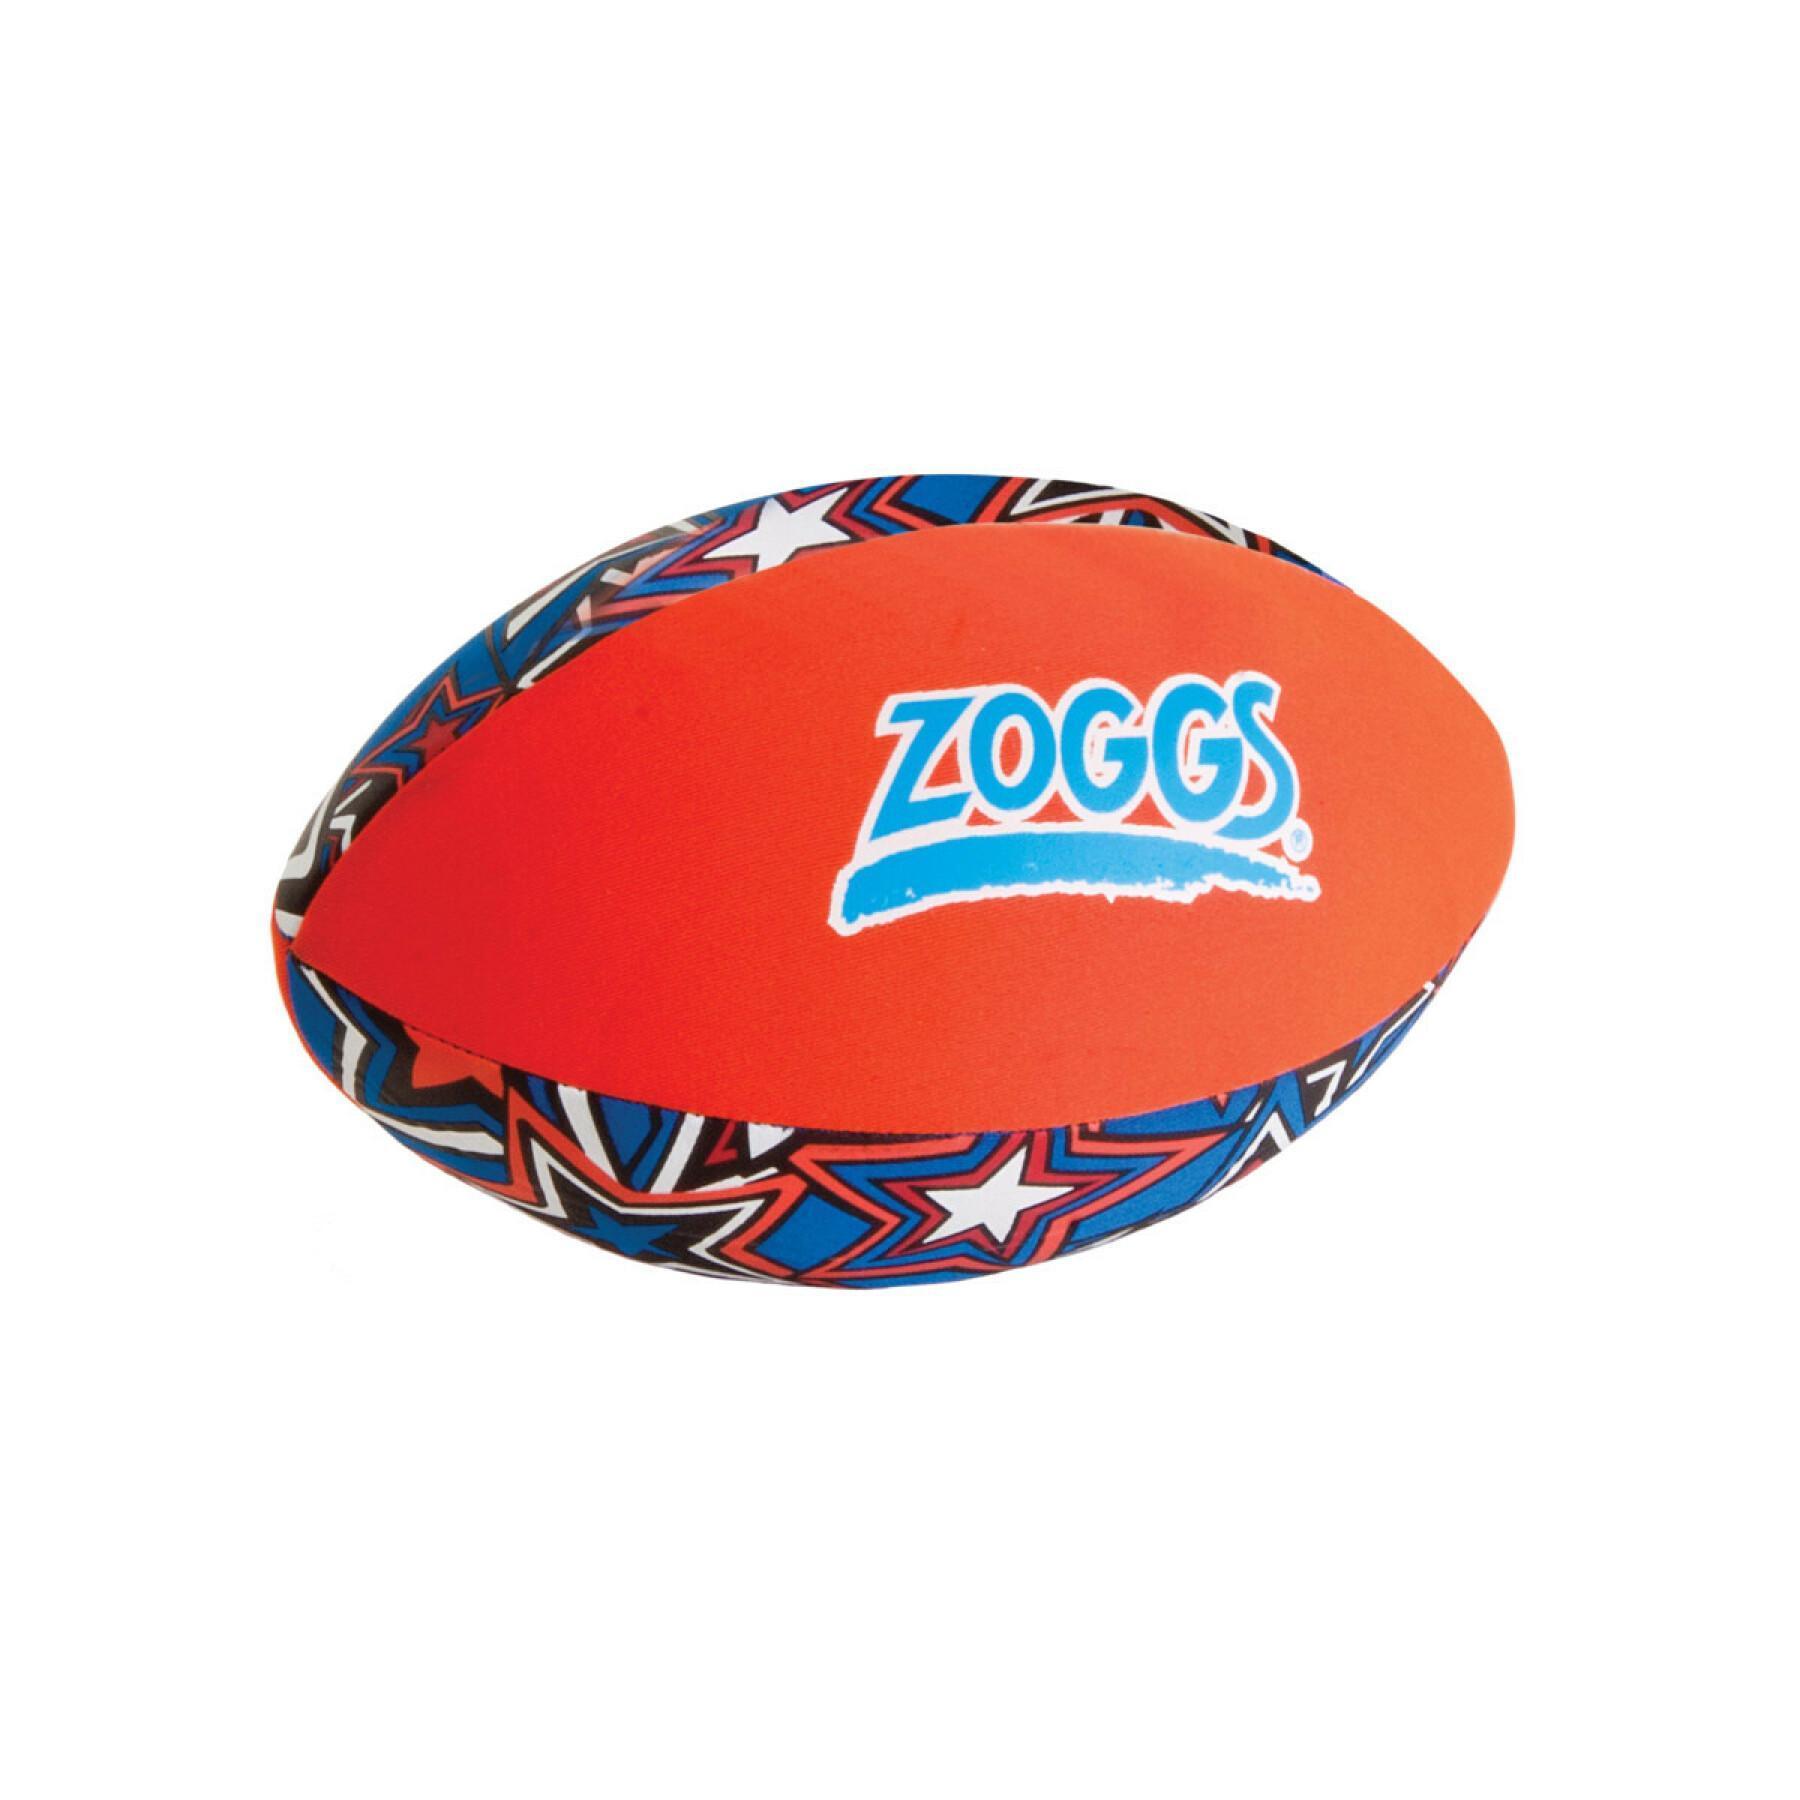 Water ball Zoggs